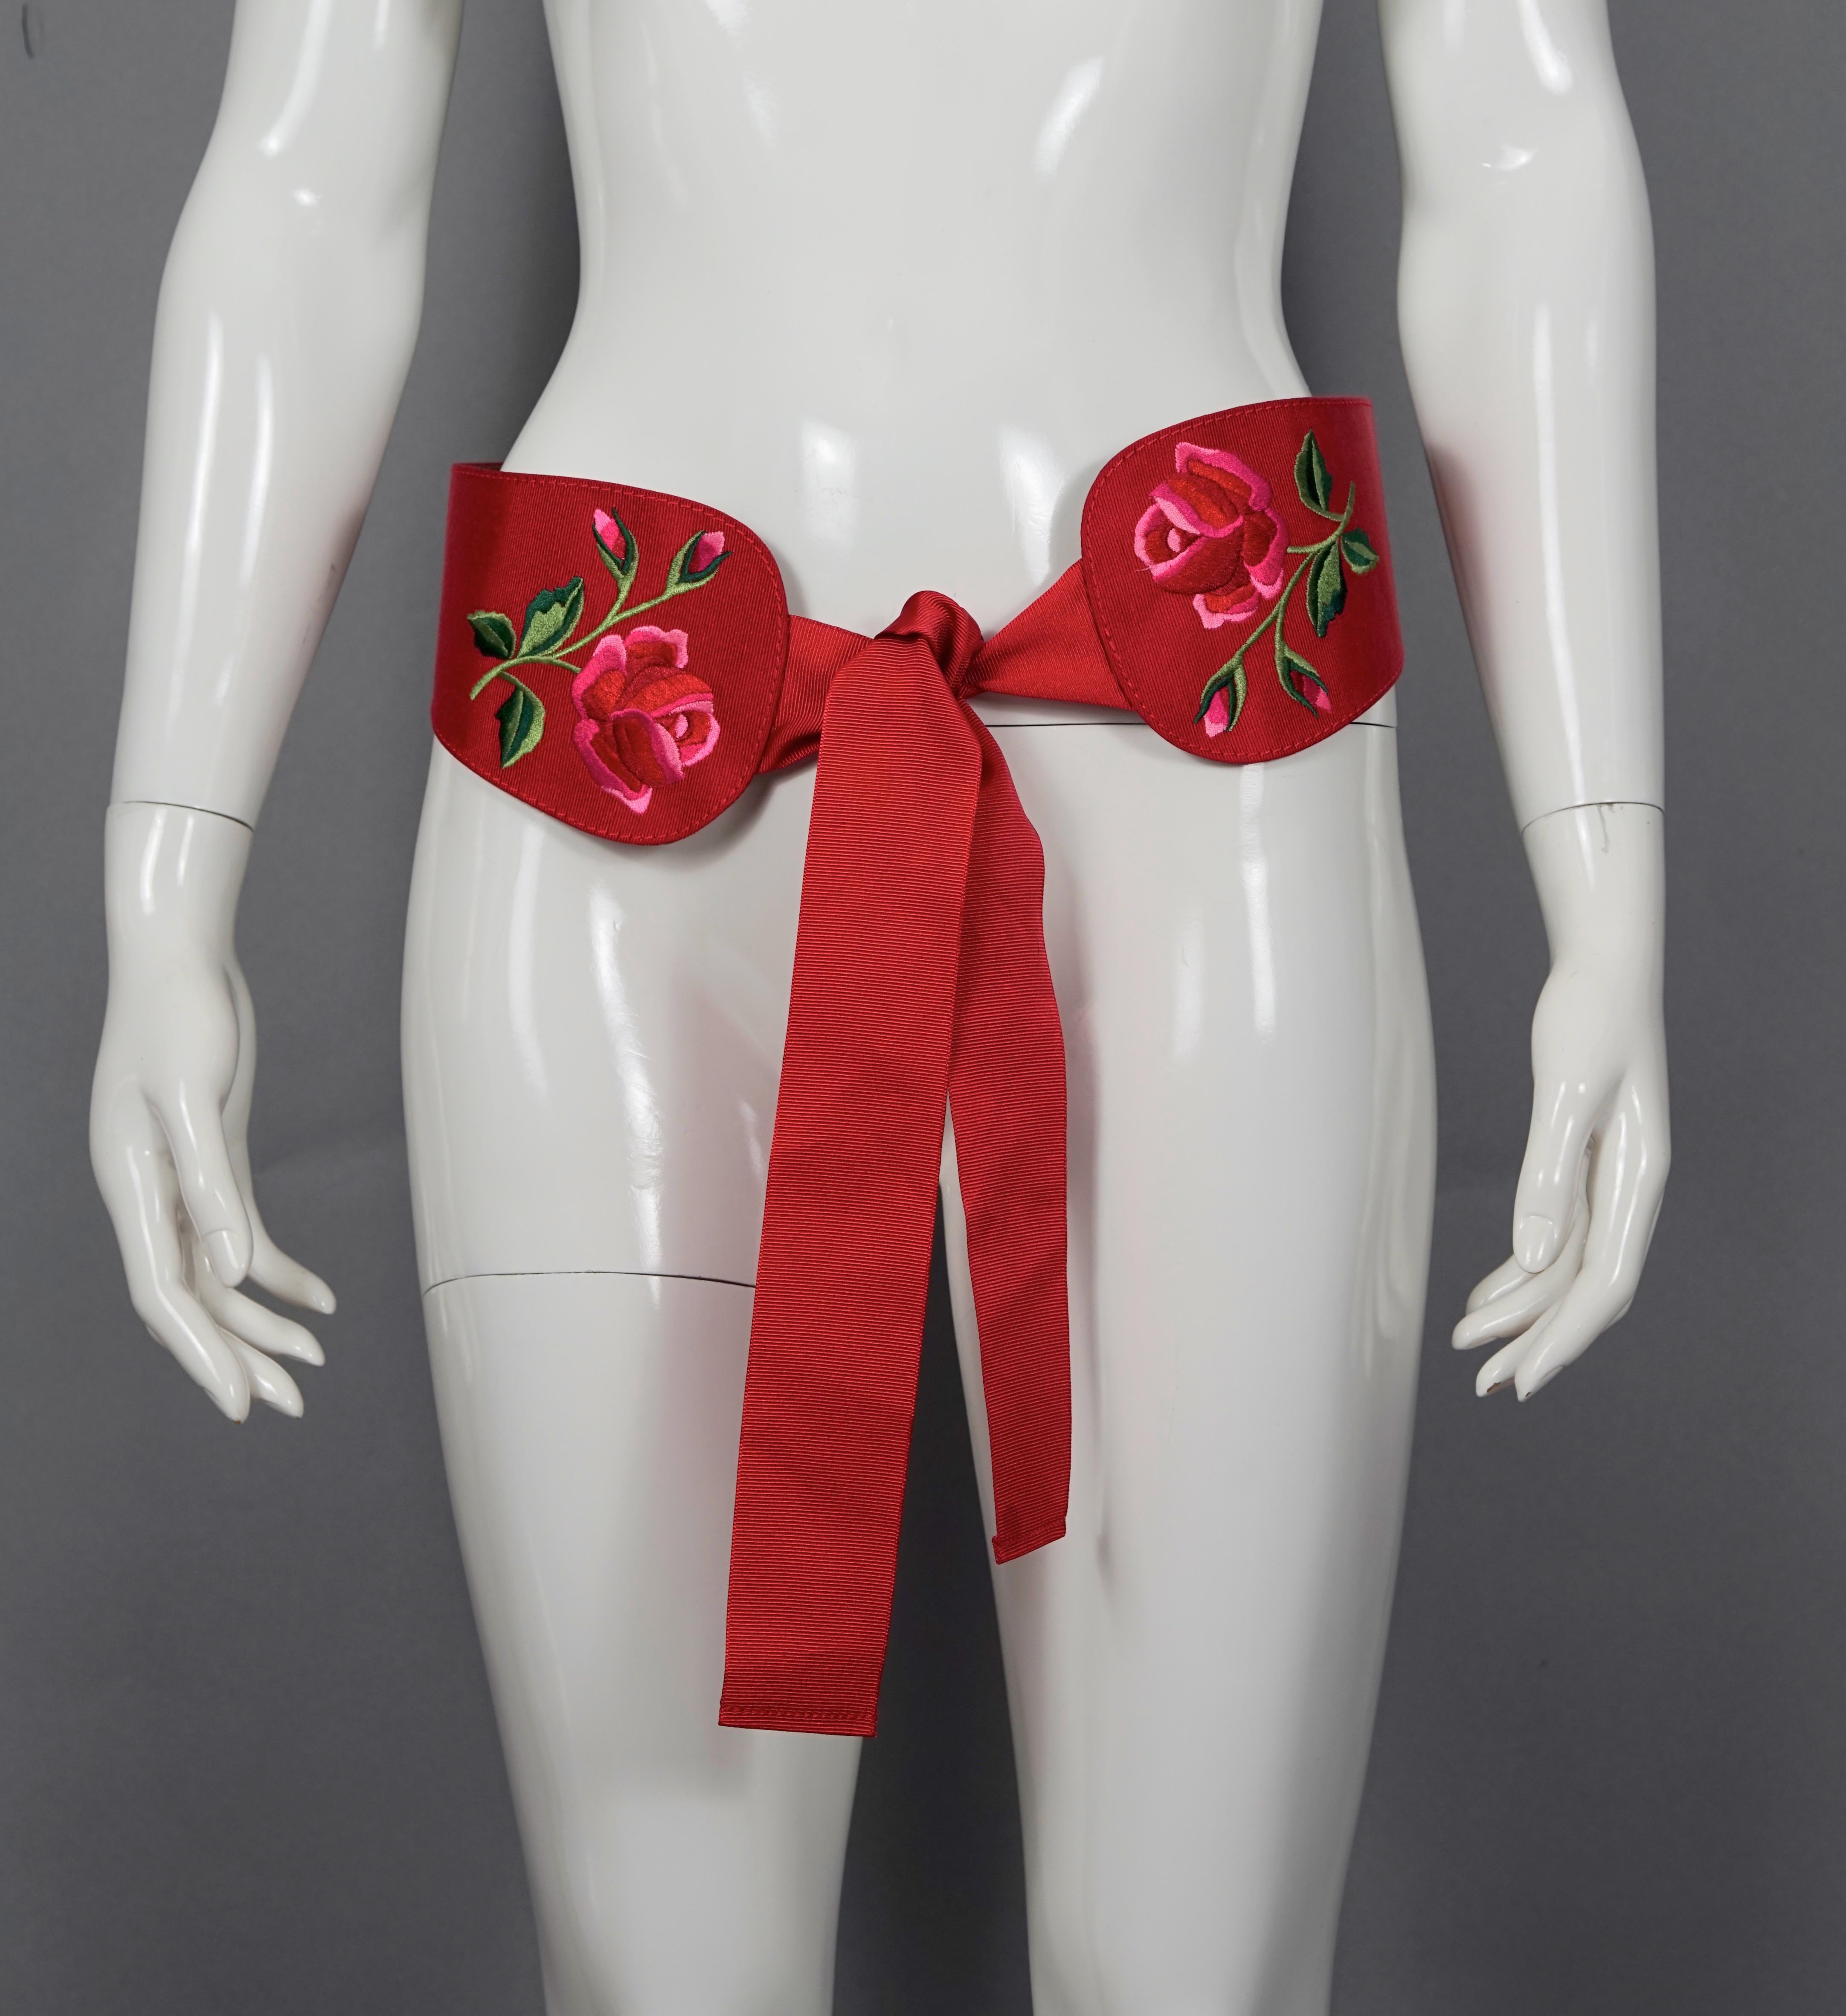 Vintage YVES SAINT LAURENT Ysl Flower Embroidered Grosgrain Ribbon Red Belt

Measurements:
Height: 4.13 inches (10.5 cm)
Length of the Band: 28.14 inches (71.5 cm)
Total Length with Ribbons: 63.18 inches (160.5 cm)

Features:
- 100% Authentic YVES